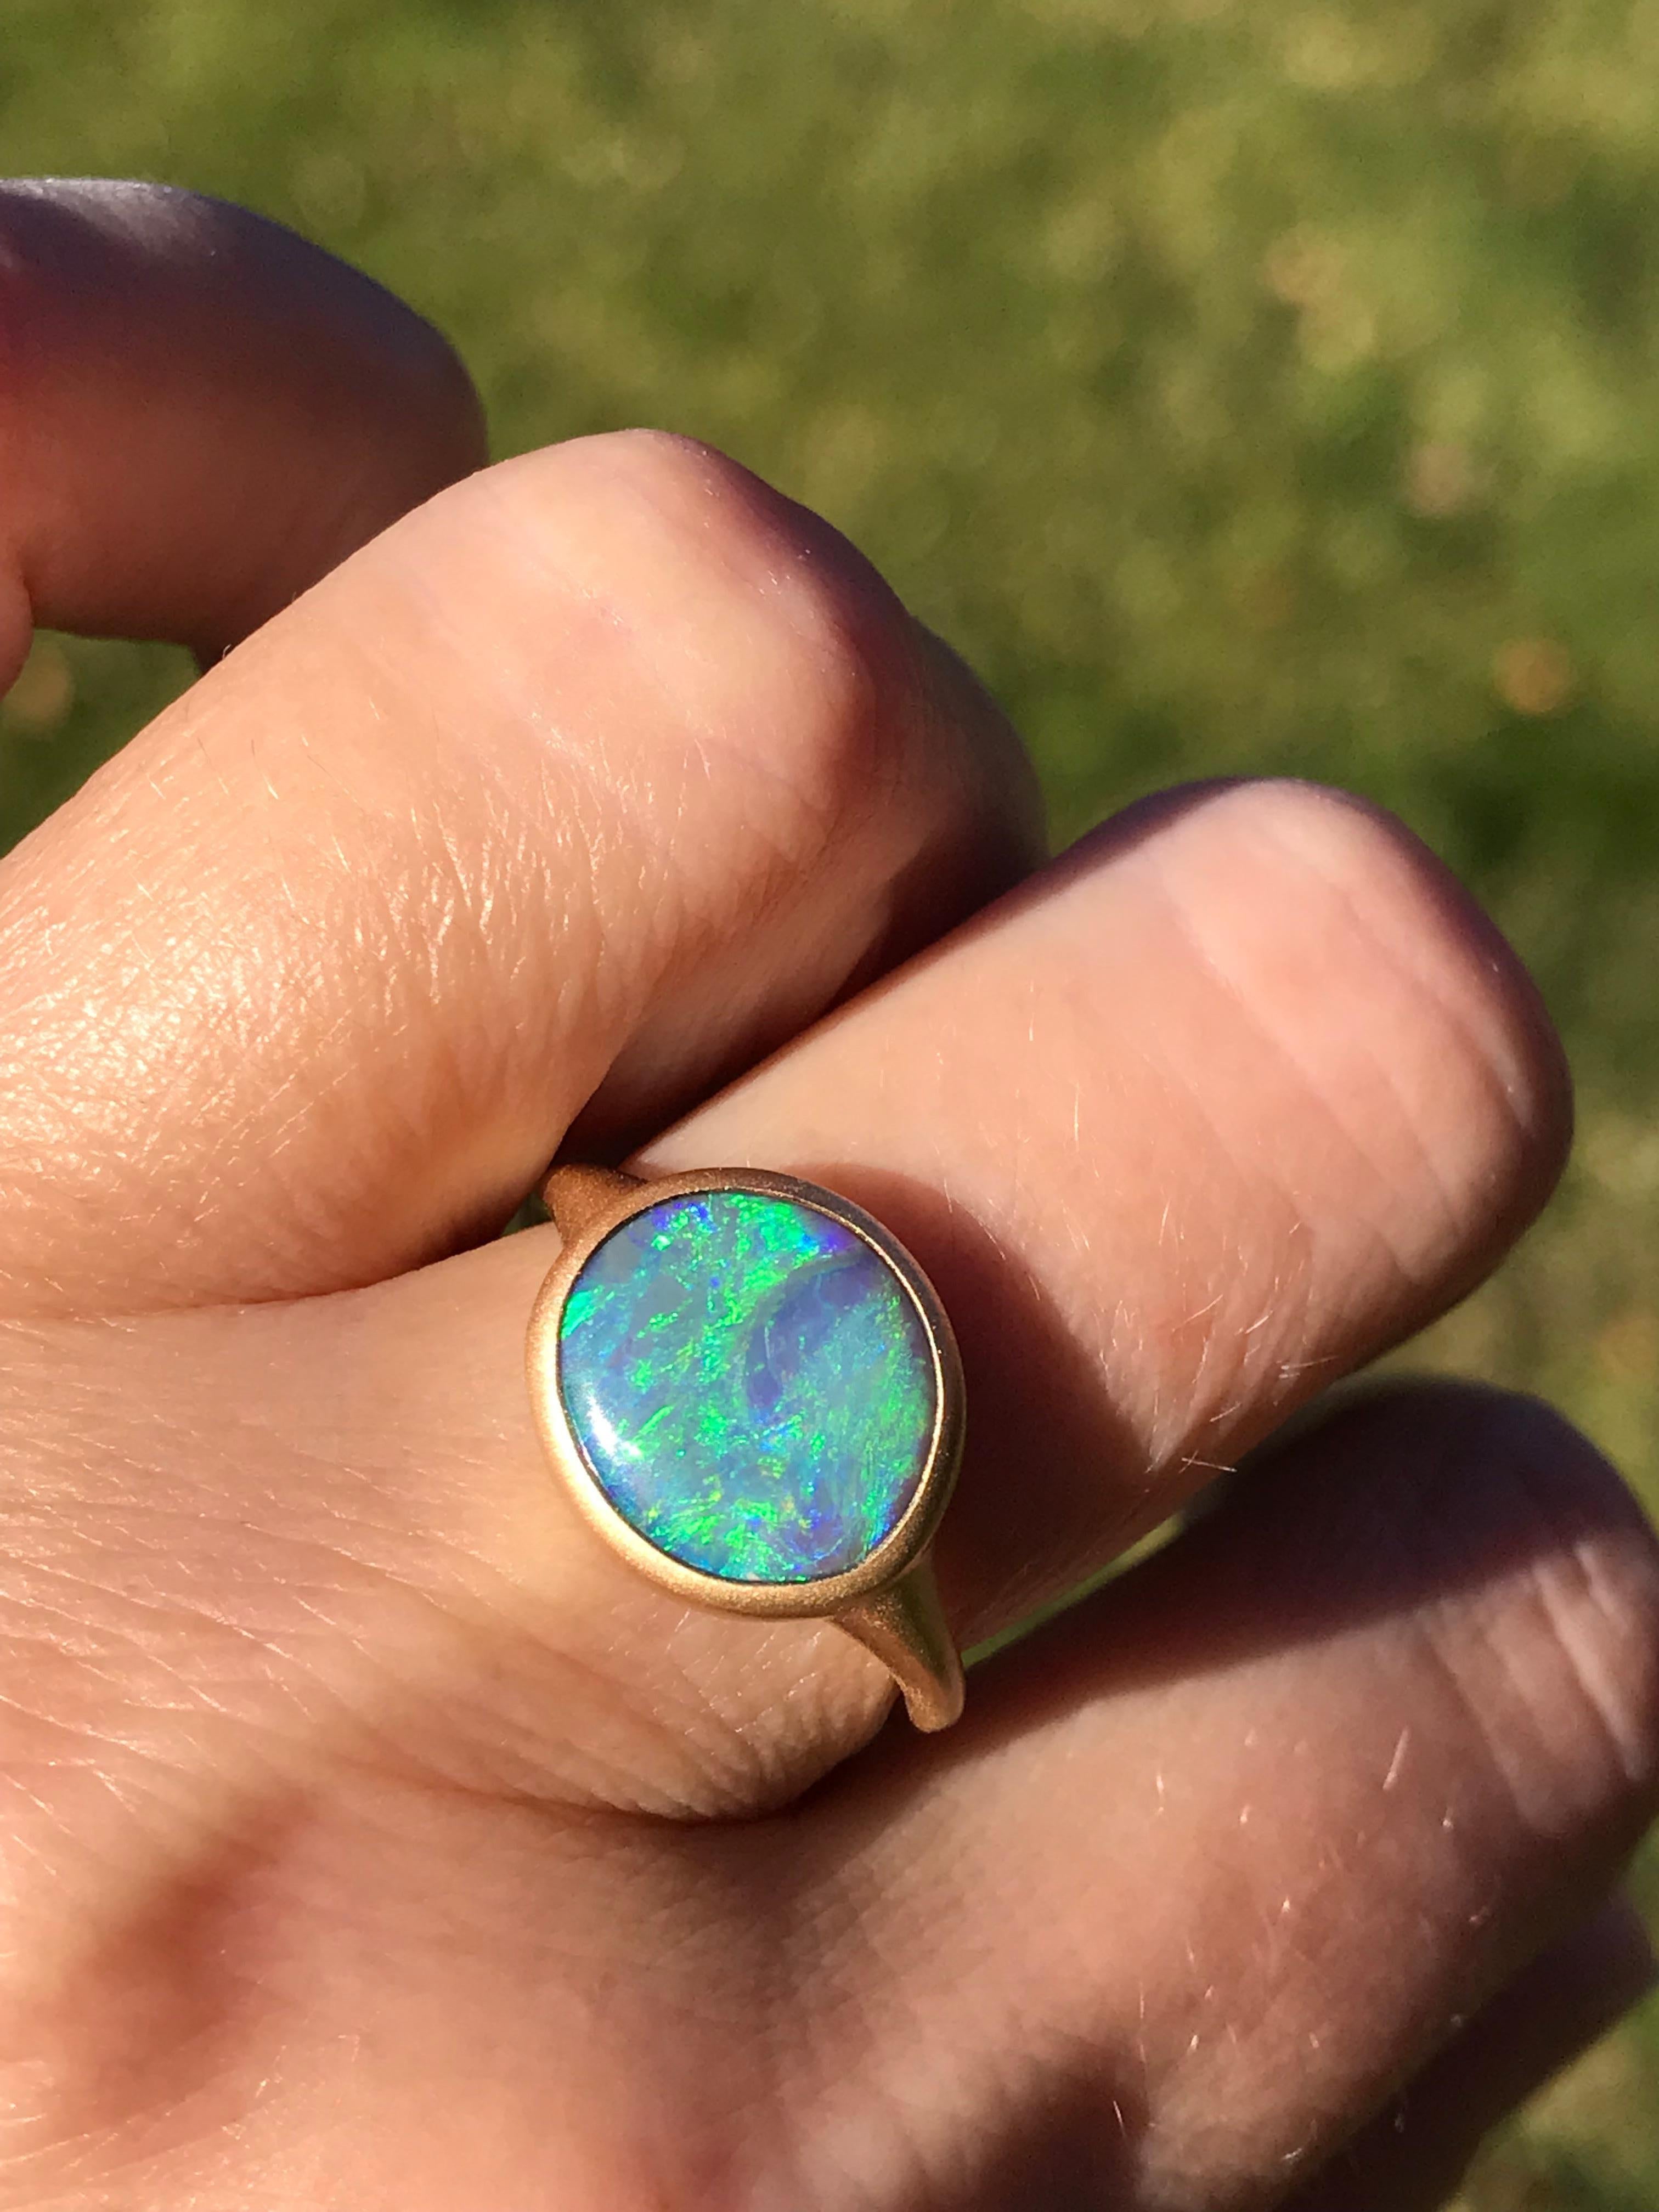 Dalben design 18k yellow gold satin finishing ring with a 3,05 carat bezel-set round-oval shape Australian crystal opal from Lighting Ridge mine .
The opal has wonderful and deep blue green light spots.
Ring size US 6 3/4 - EU 54 re-sizable to most